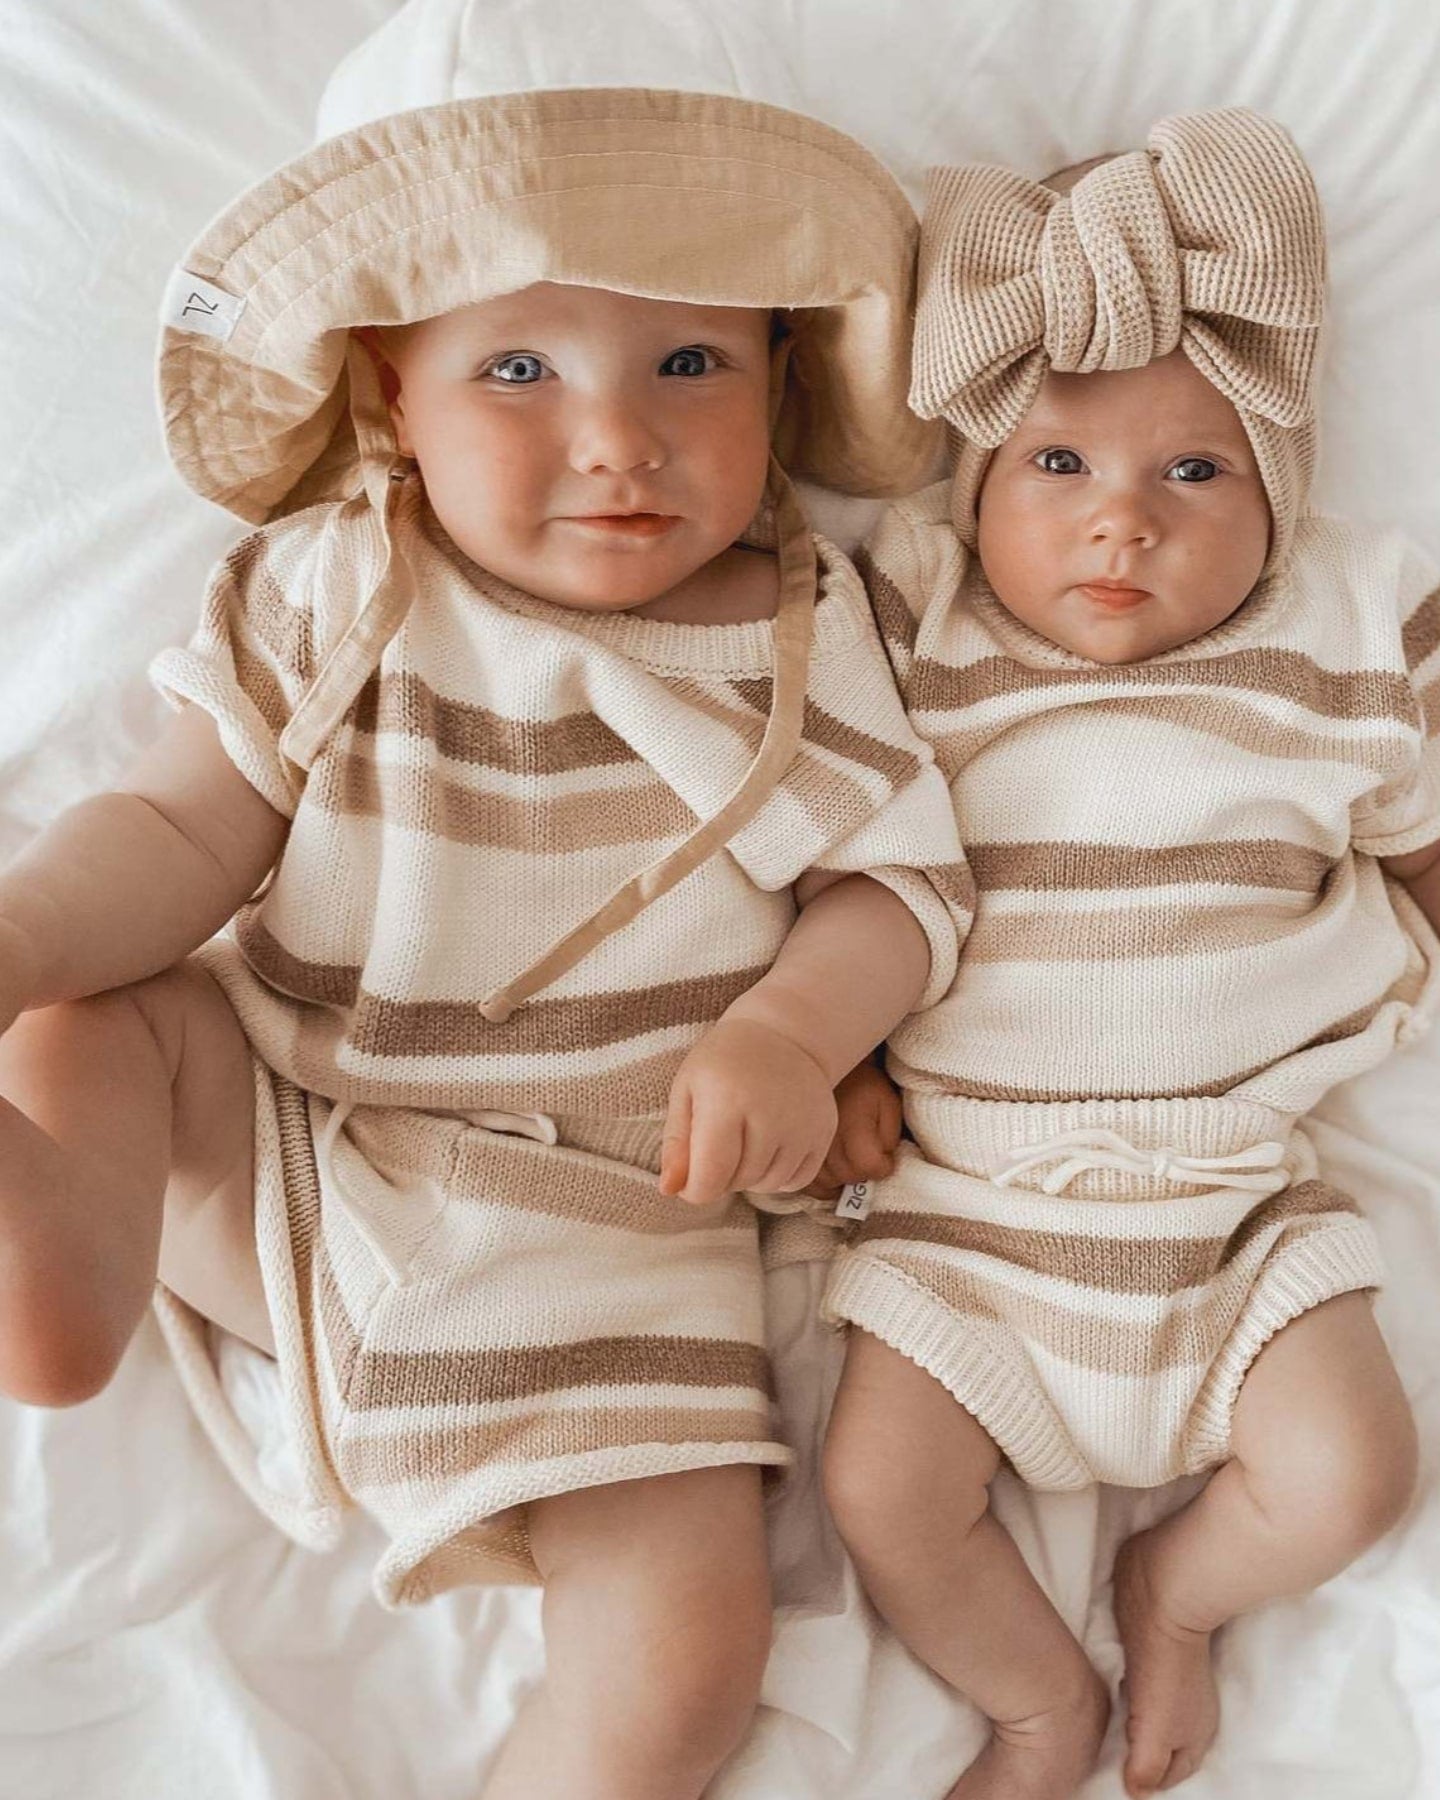 Stripe Knitted Lounge Set - Baby Outfits at Louie Meets Lola